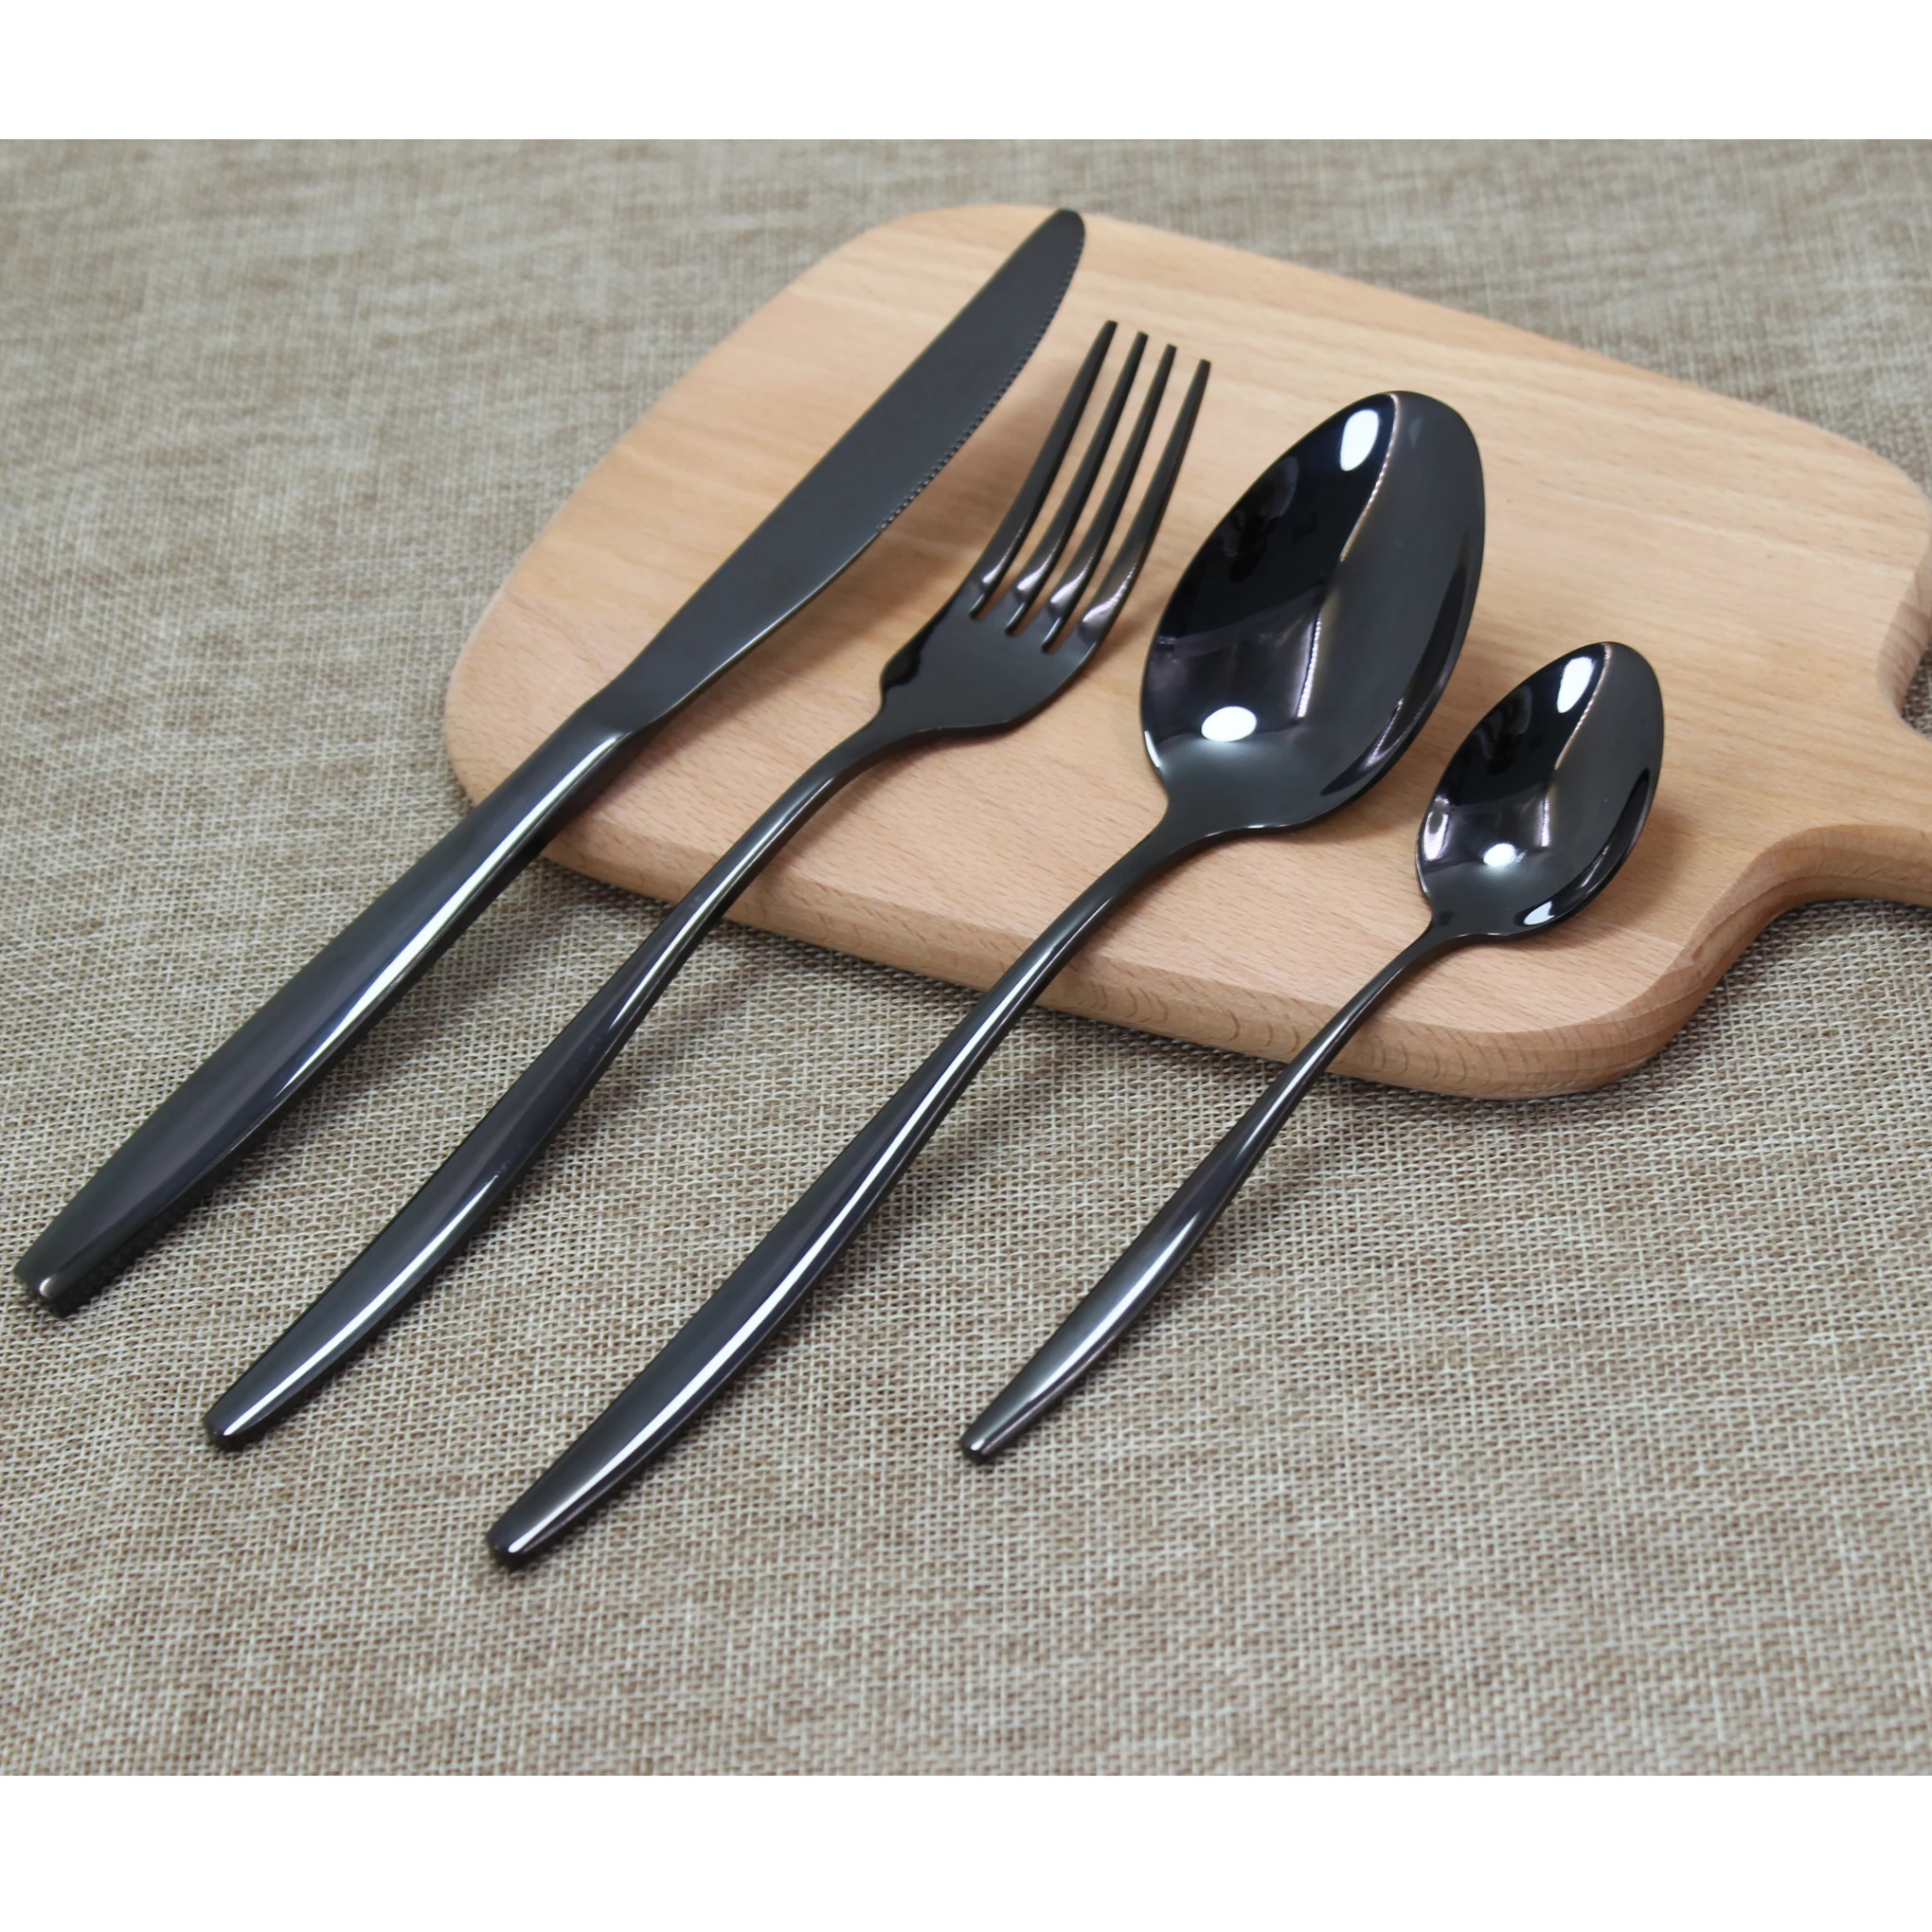 

Jieyang PVD customized luxury portable baby knife fork spoon set stainless steel cutlery flatware set black wholesale sale, Black, but can customize